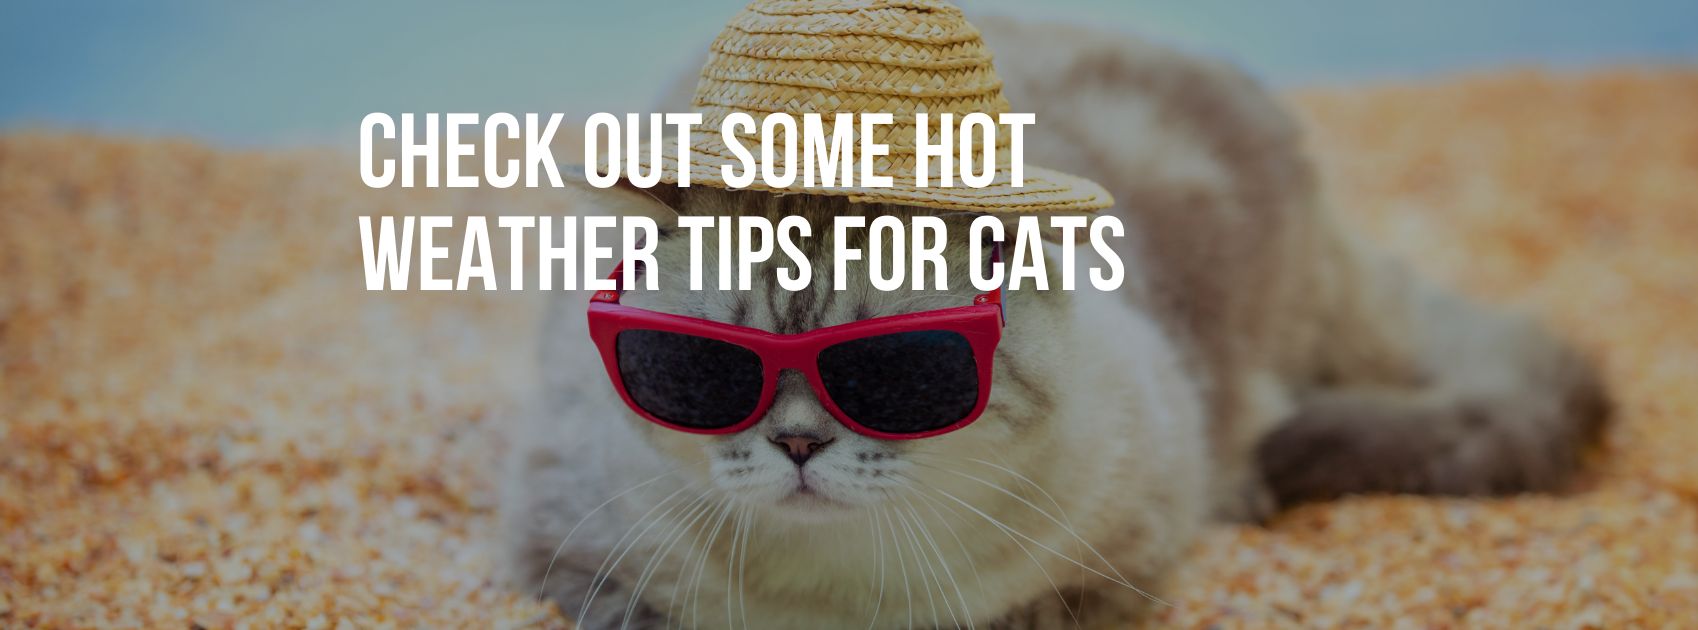 Check Out Some Hot Weather Tips for Cats